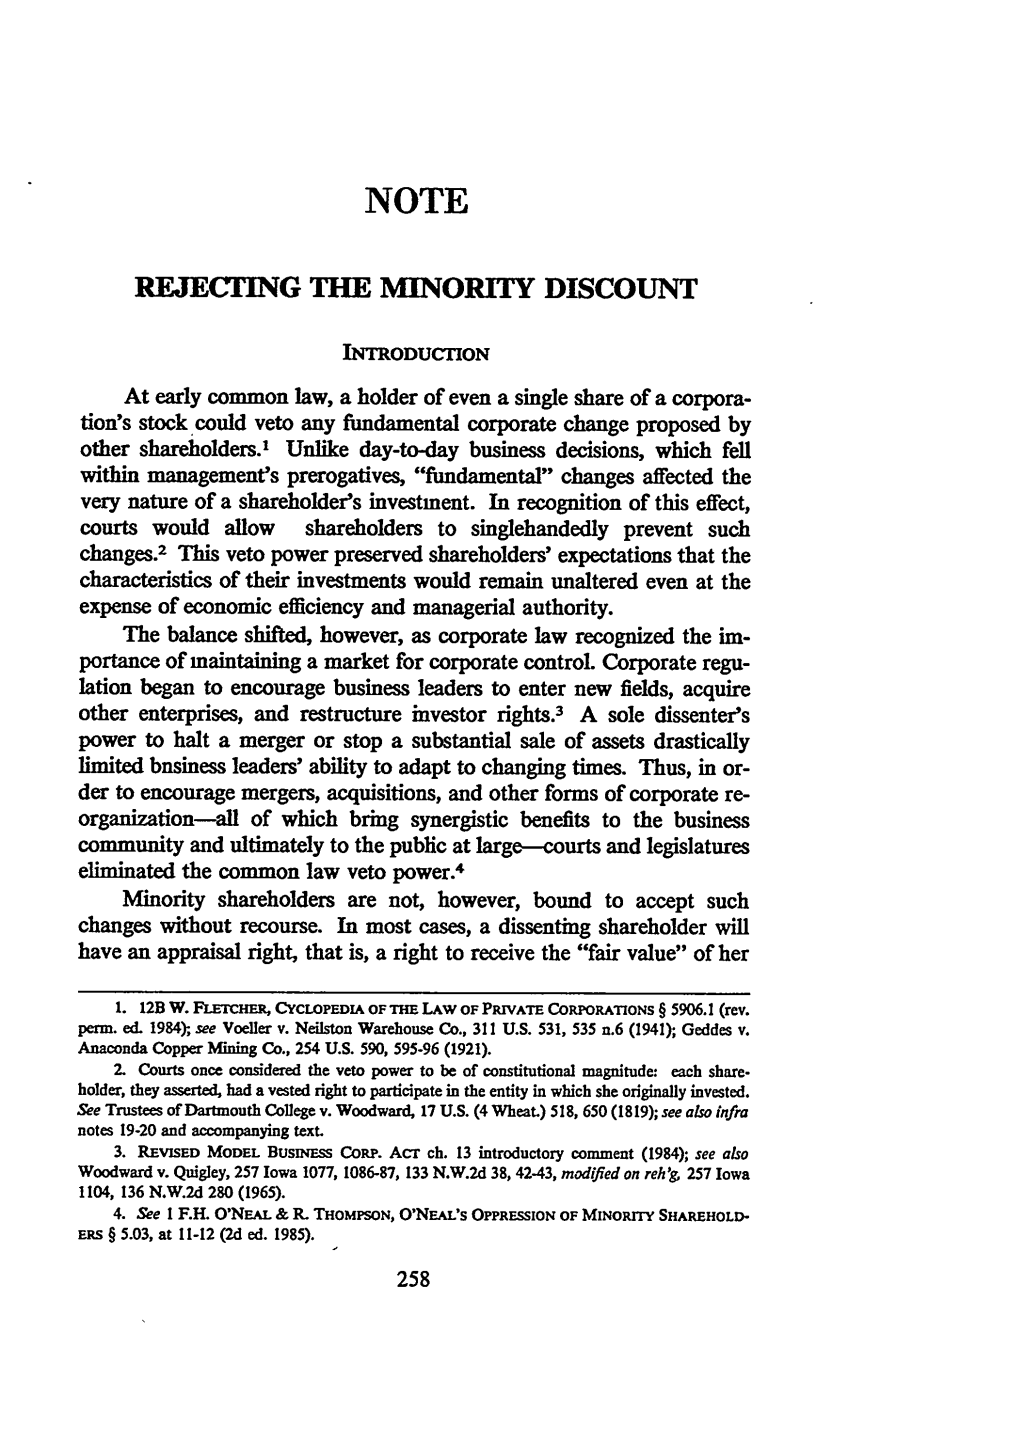 Rejecting the Minority Discount